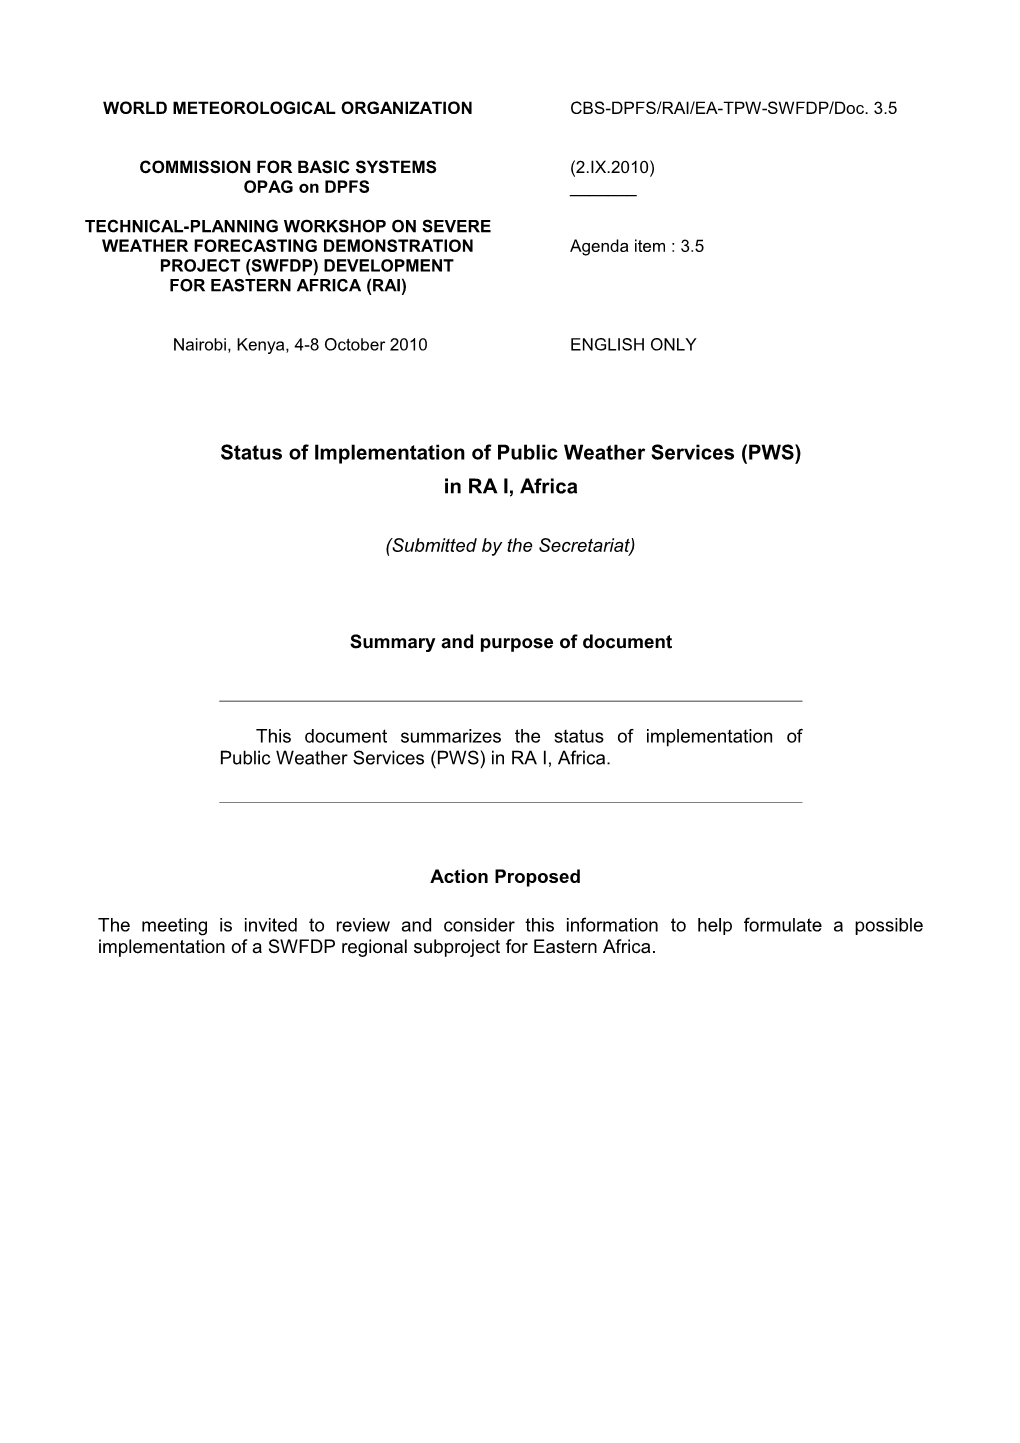 Status of Implementation of Public Weather Services (PWS) in RA I Africa